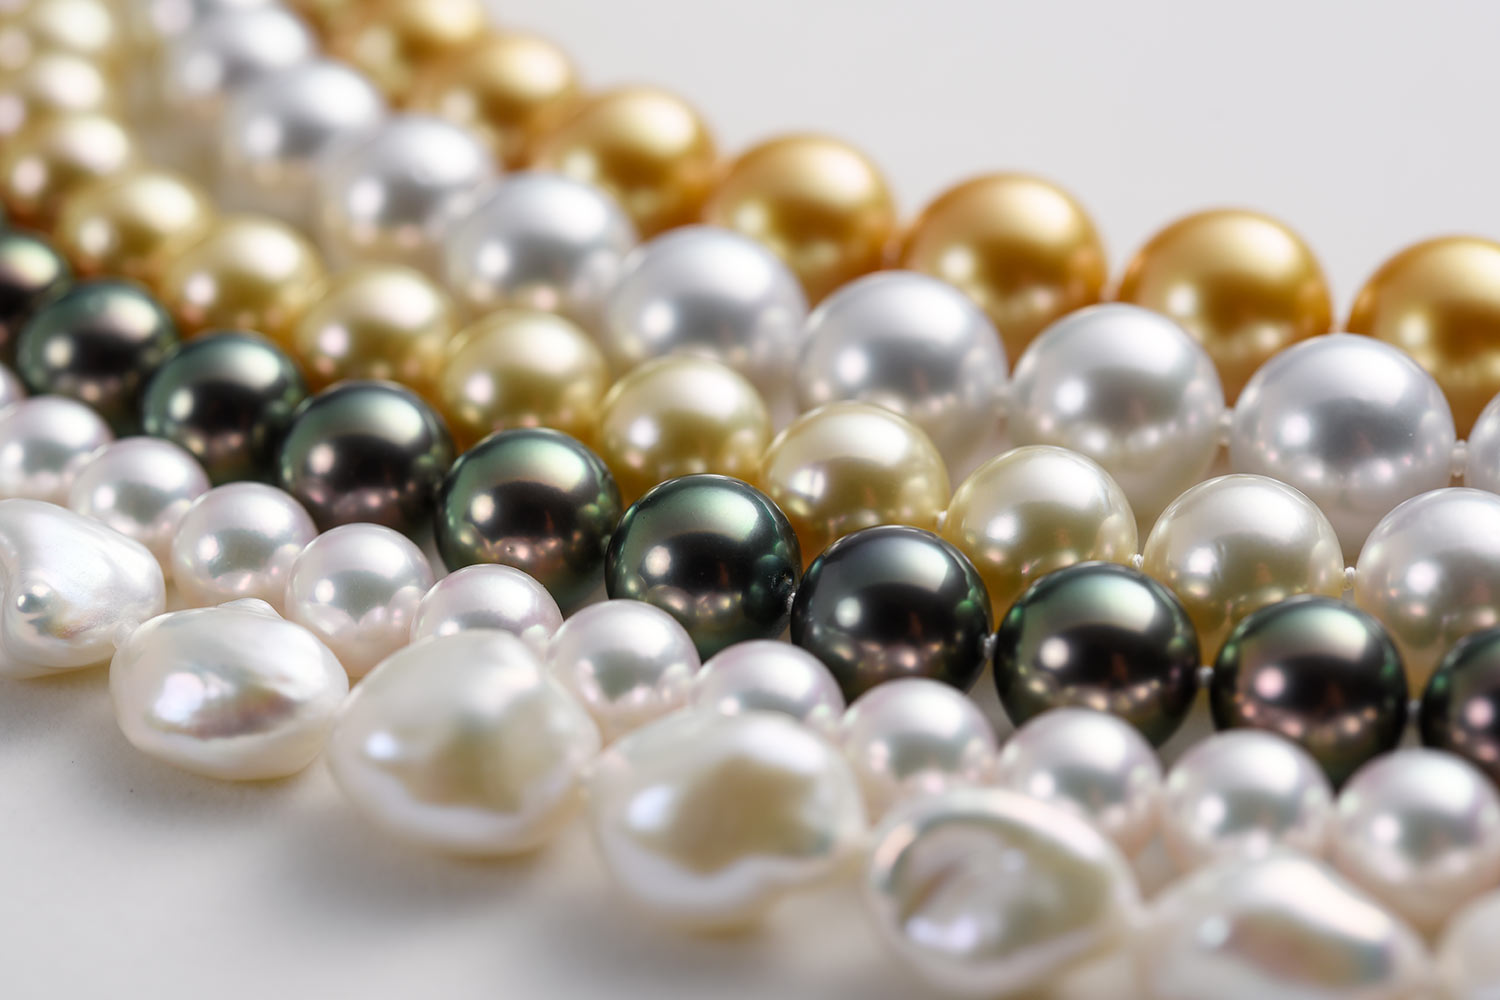 Jewelry wholesaler dealing with pearls and diamond, TOKYO PEARL